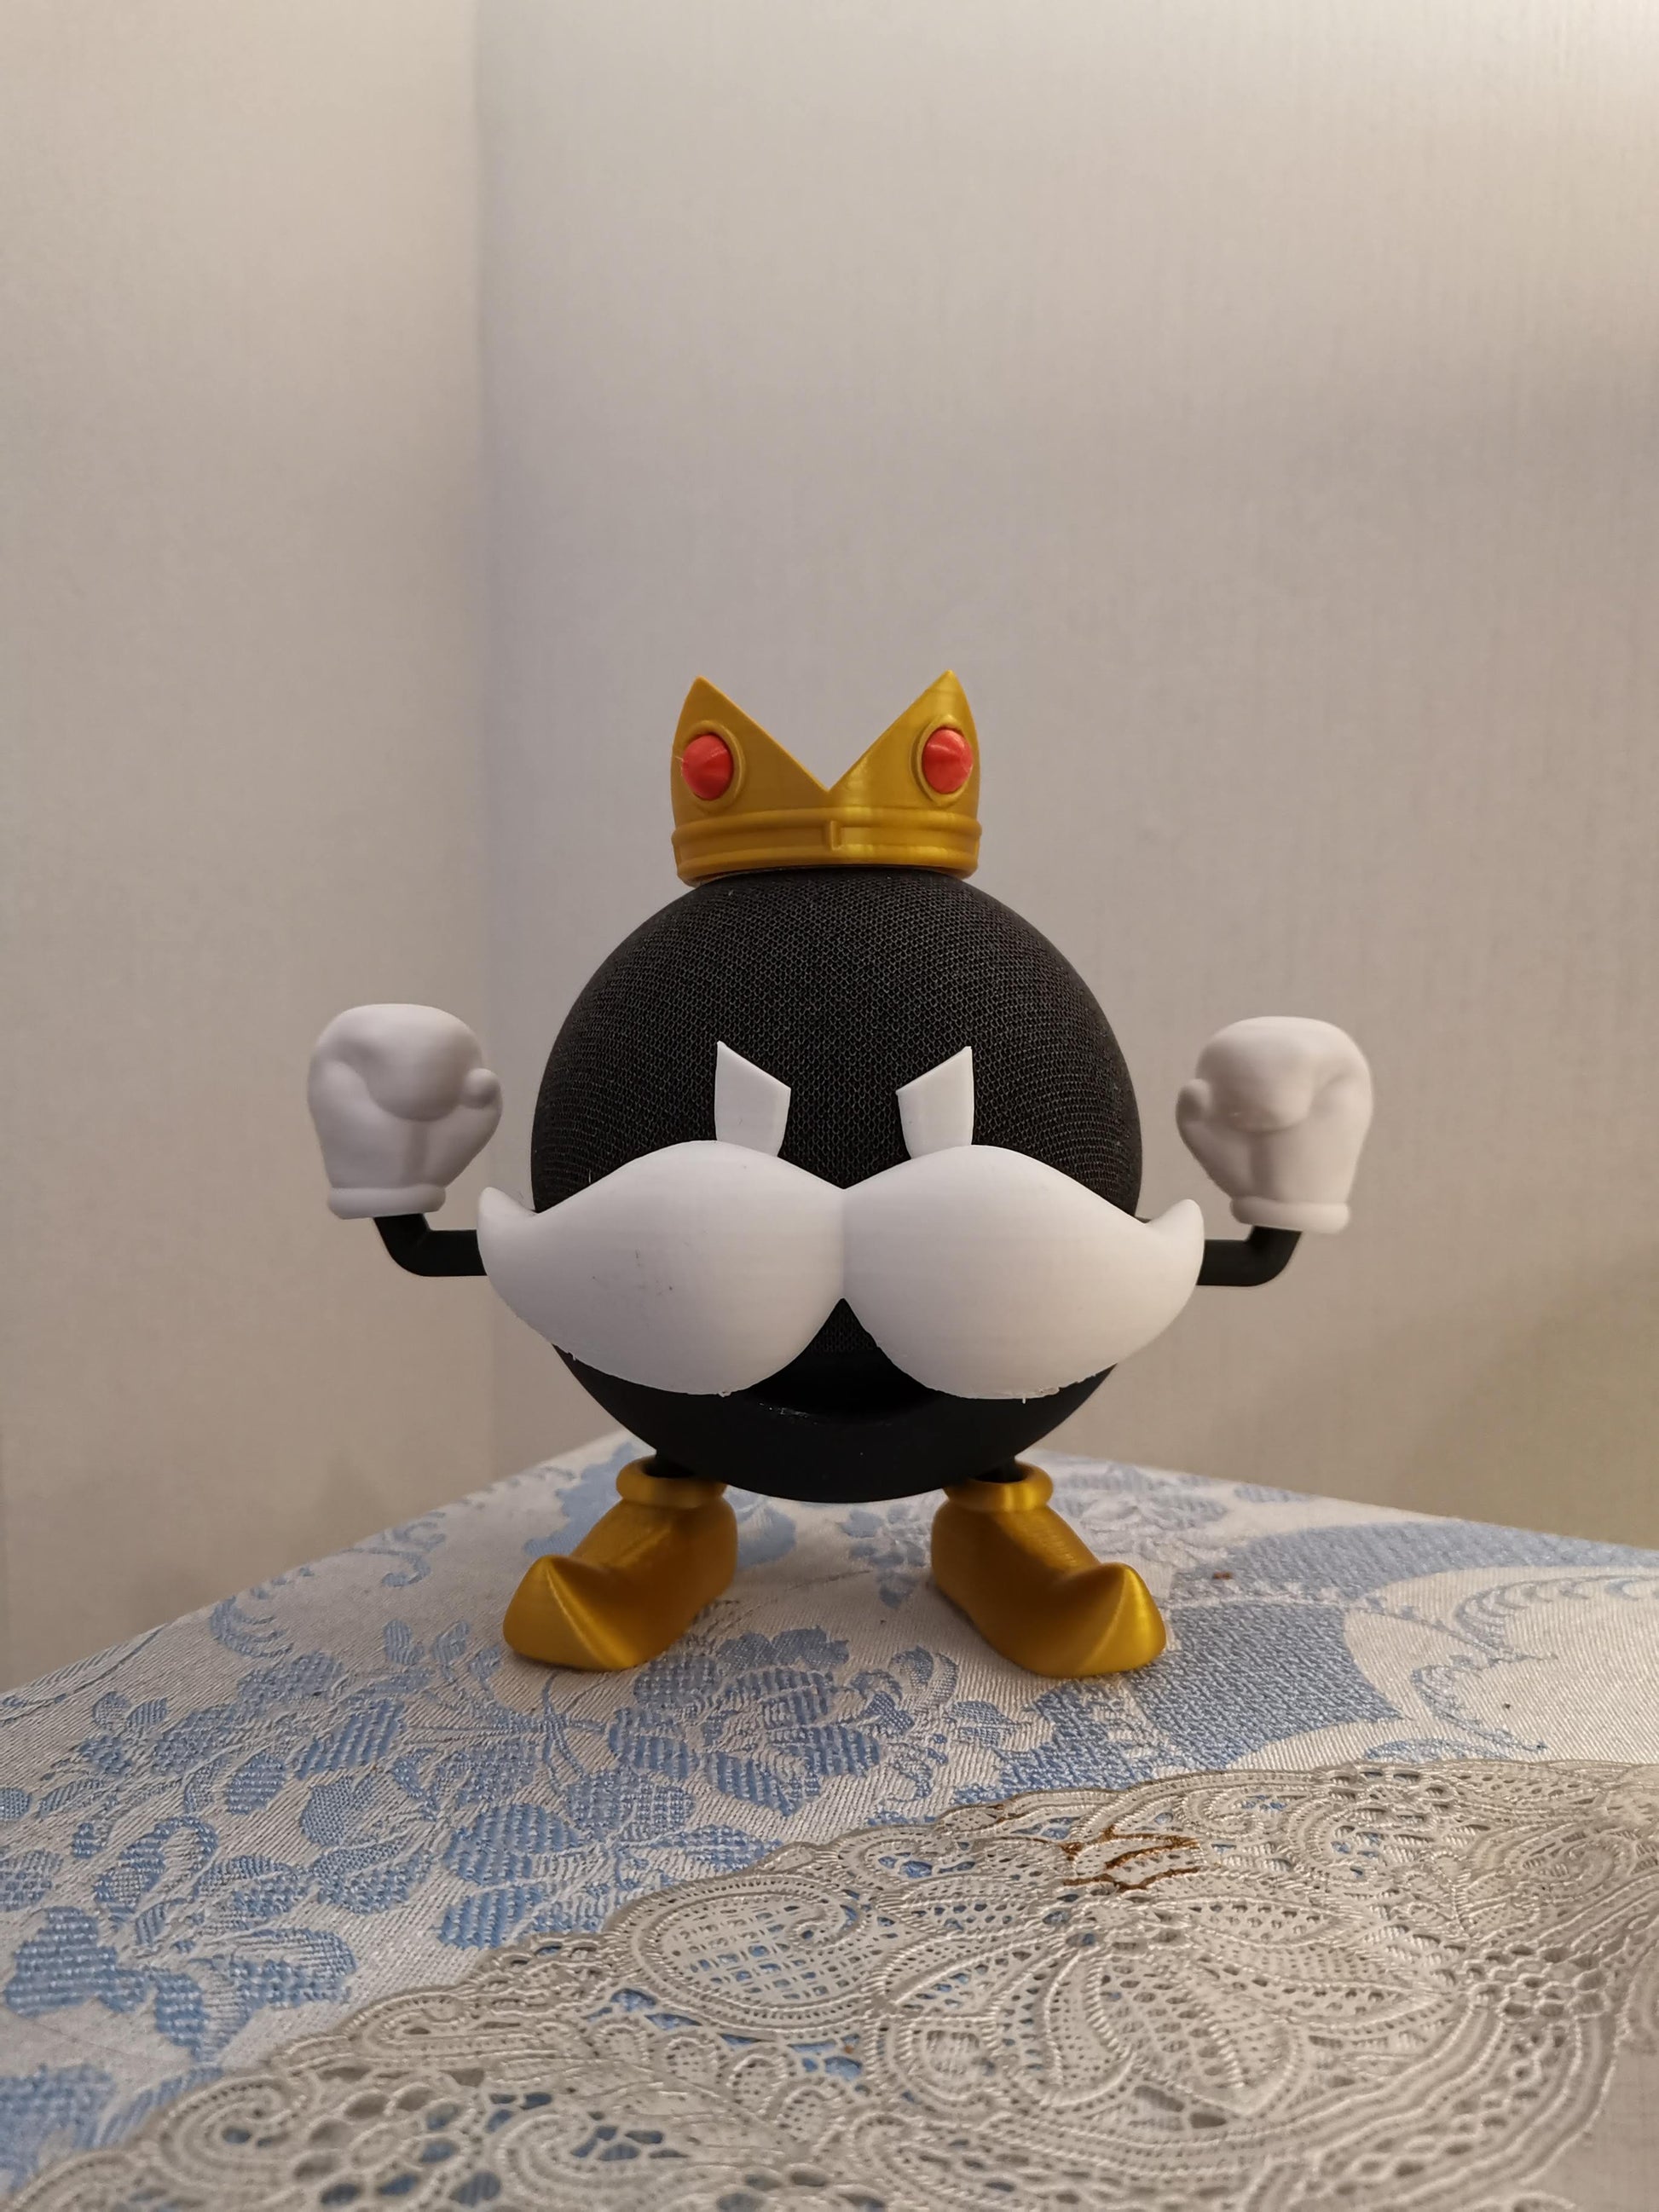 King Bomb-omb Alexa Echo holder with crown on top